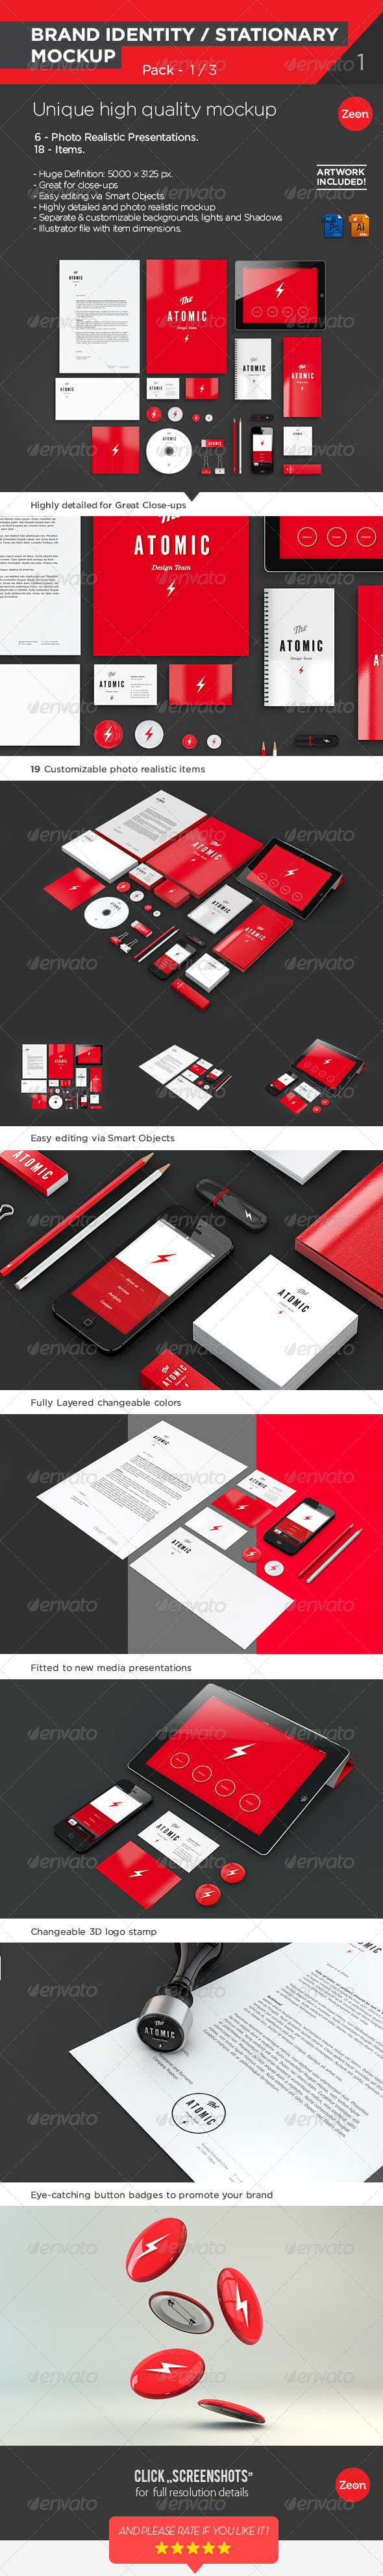 Download Stock Graphic - GraphicRiver Brand Identity Stationary Mockup Pack 1 3 4249345 » Dondrup.com